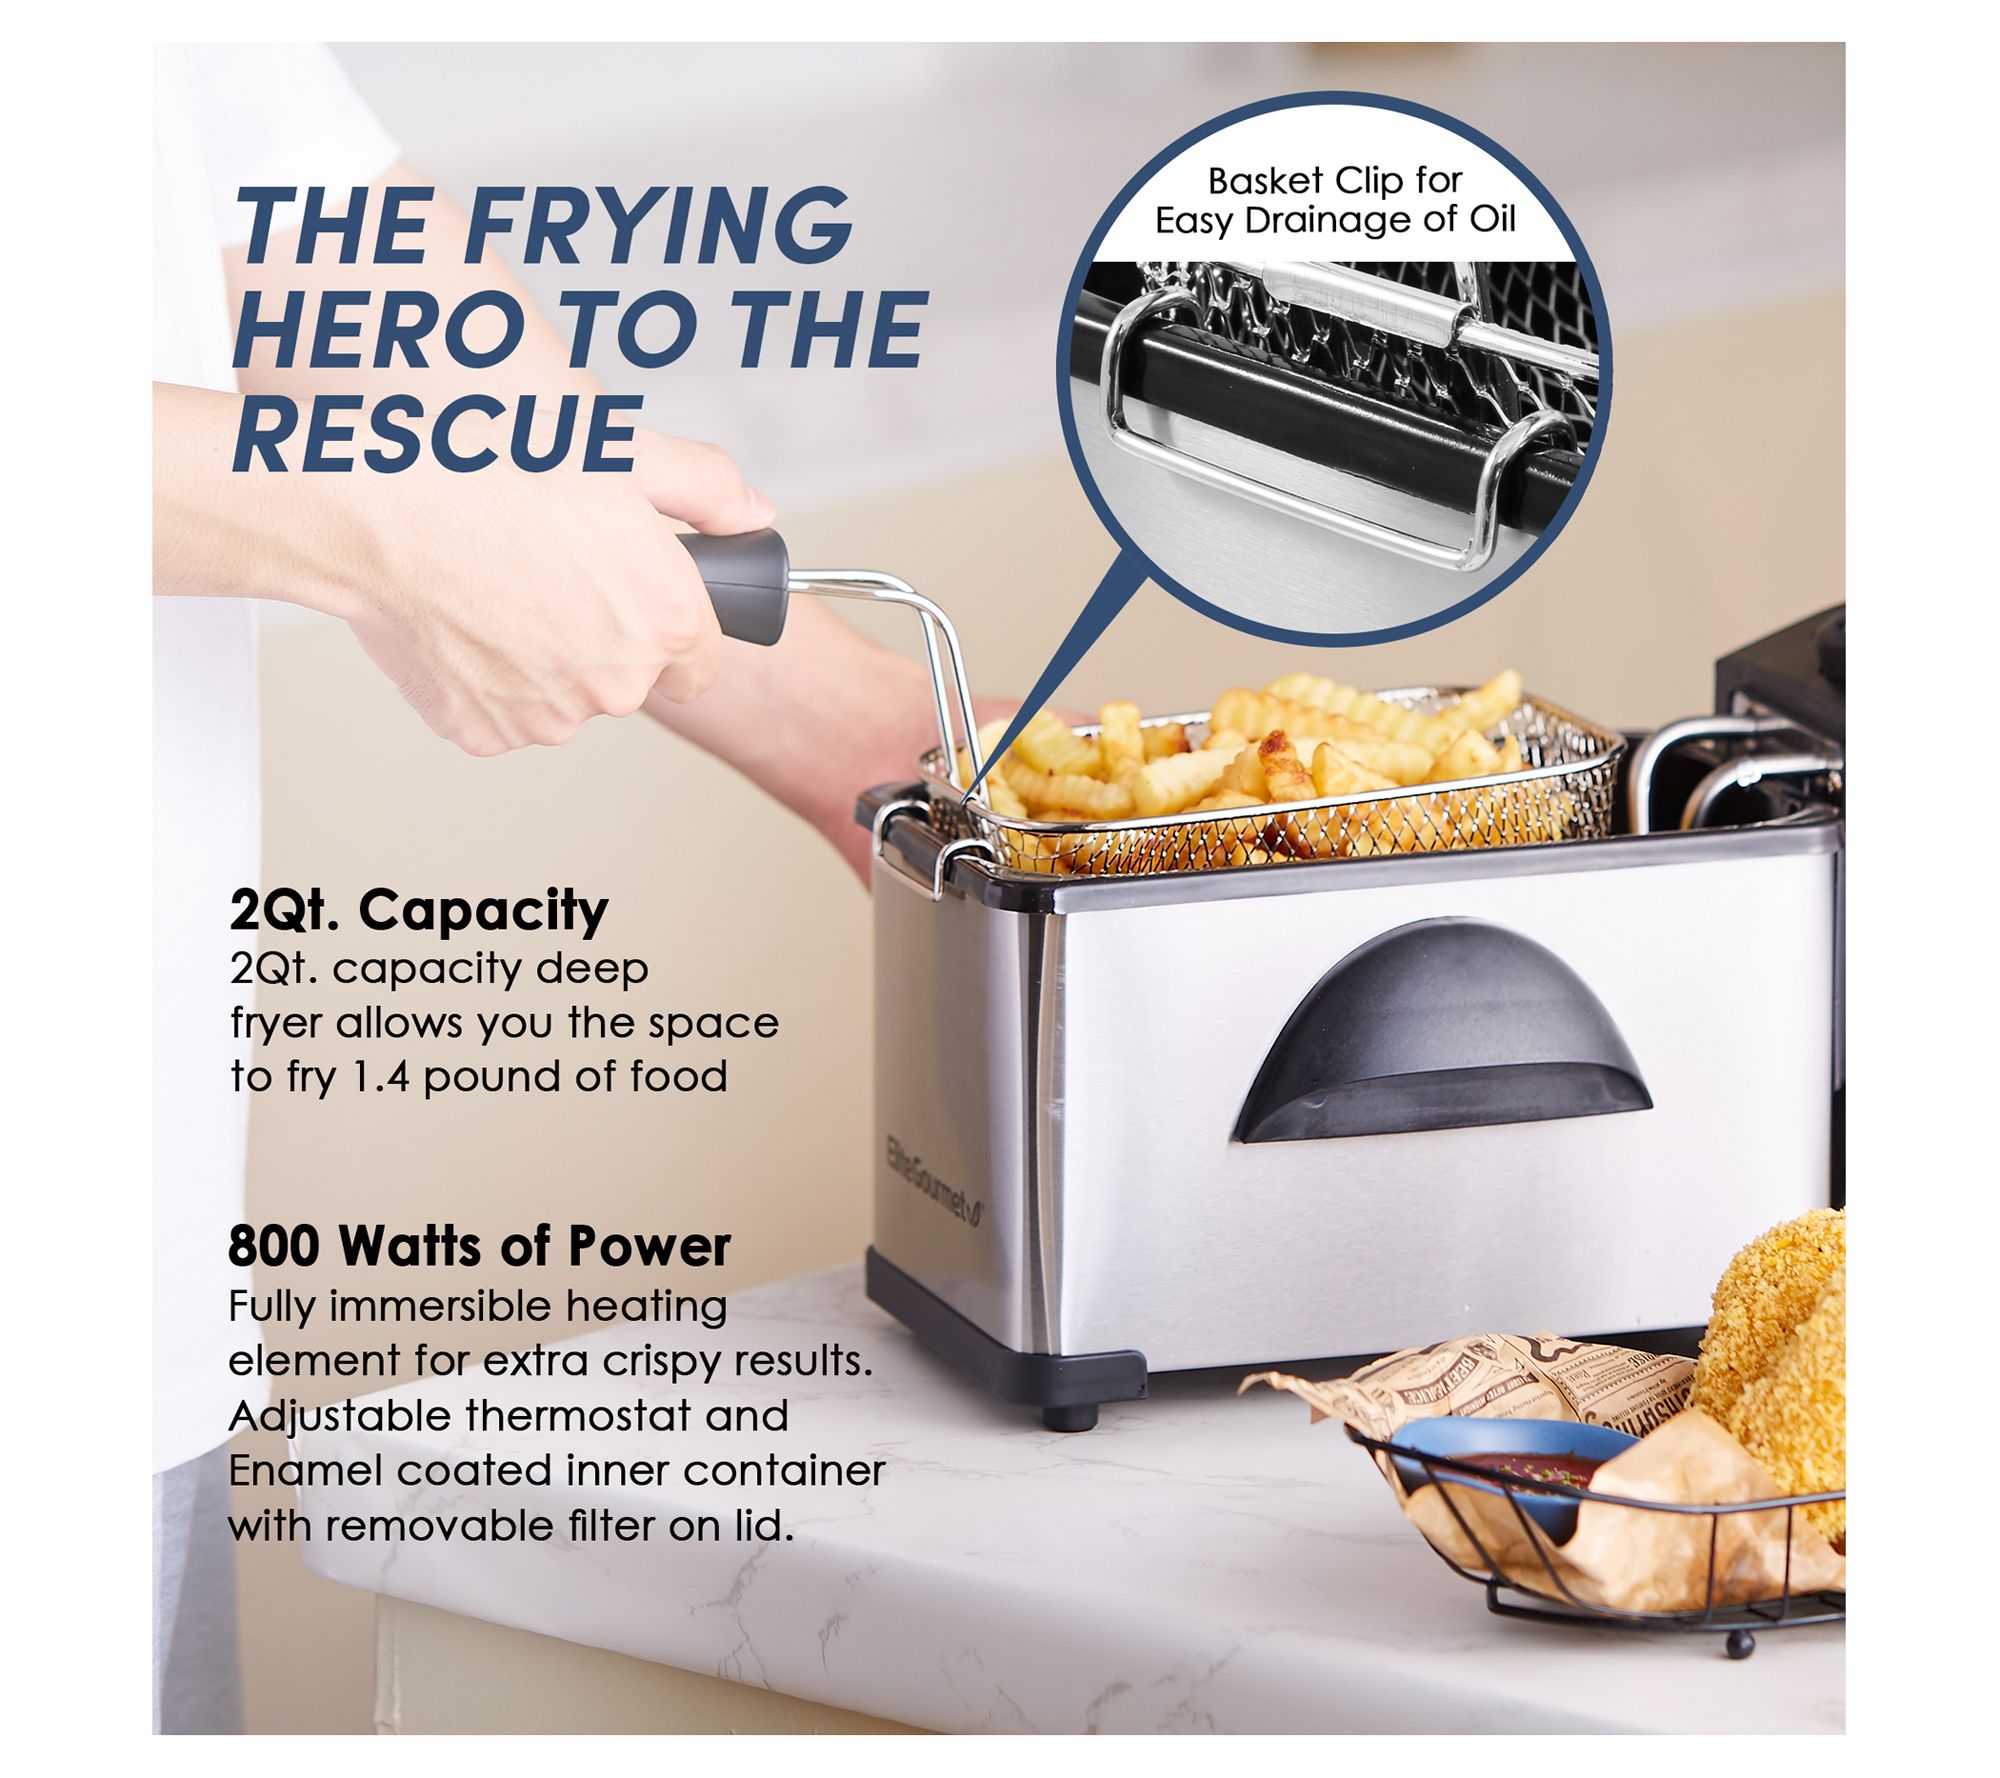 Professional Series Classic Deep Fryer 3 Lt Stainless Steel - Removable Fry  Basket, Variable Temperature Controls - ETL Listed in the Deep Fryers  department at